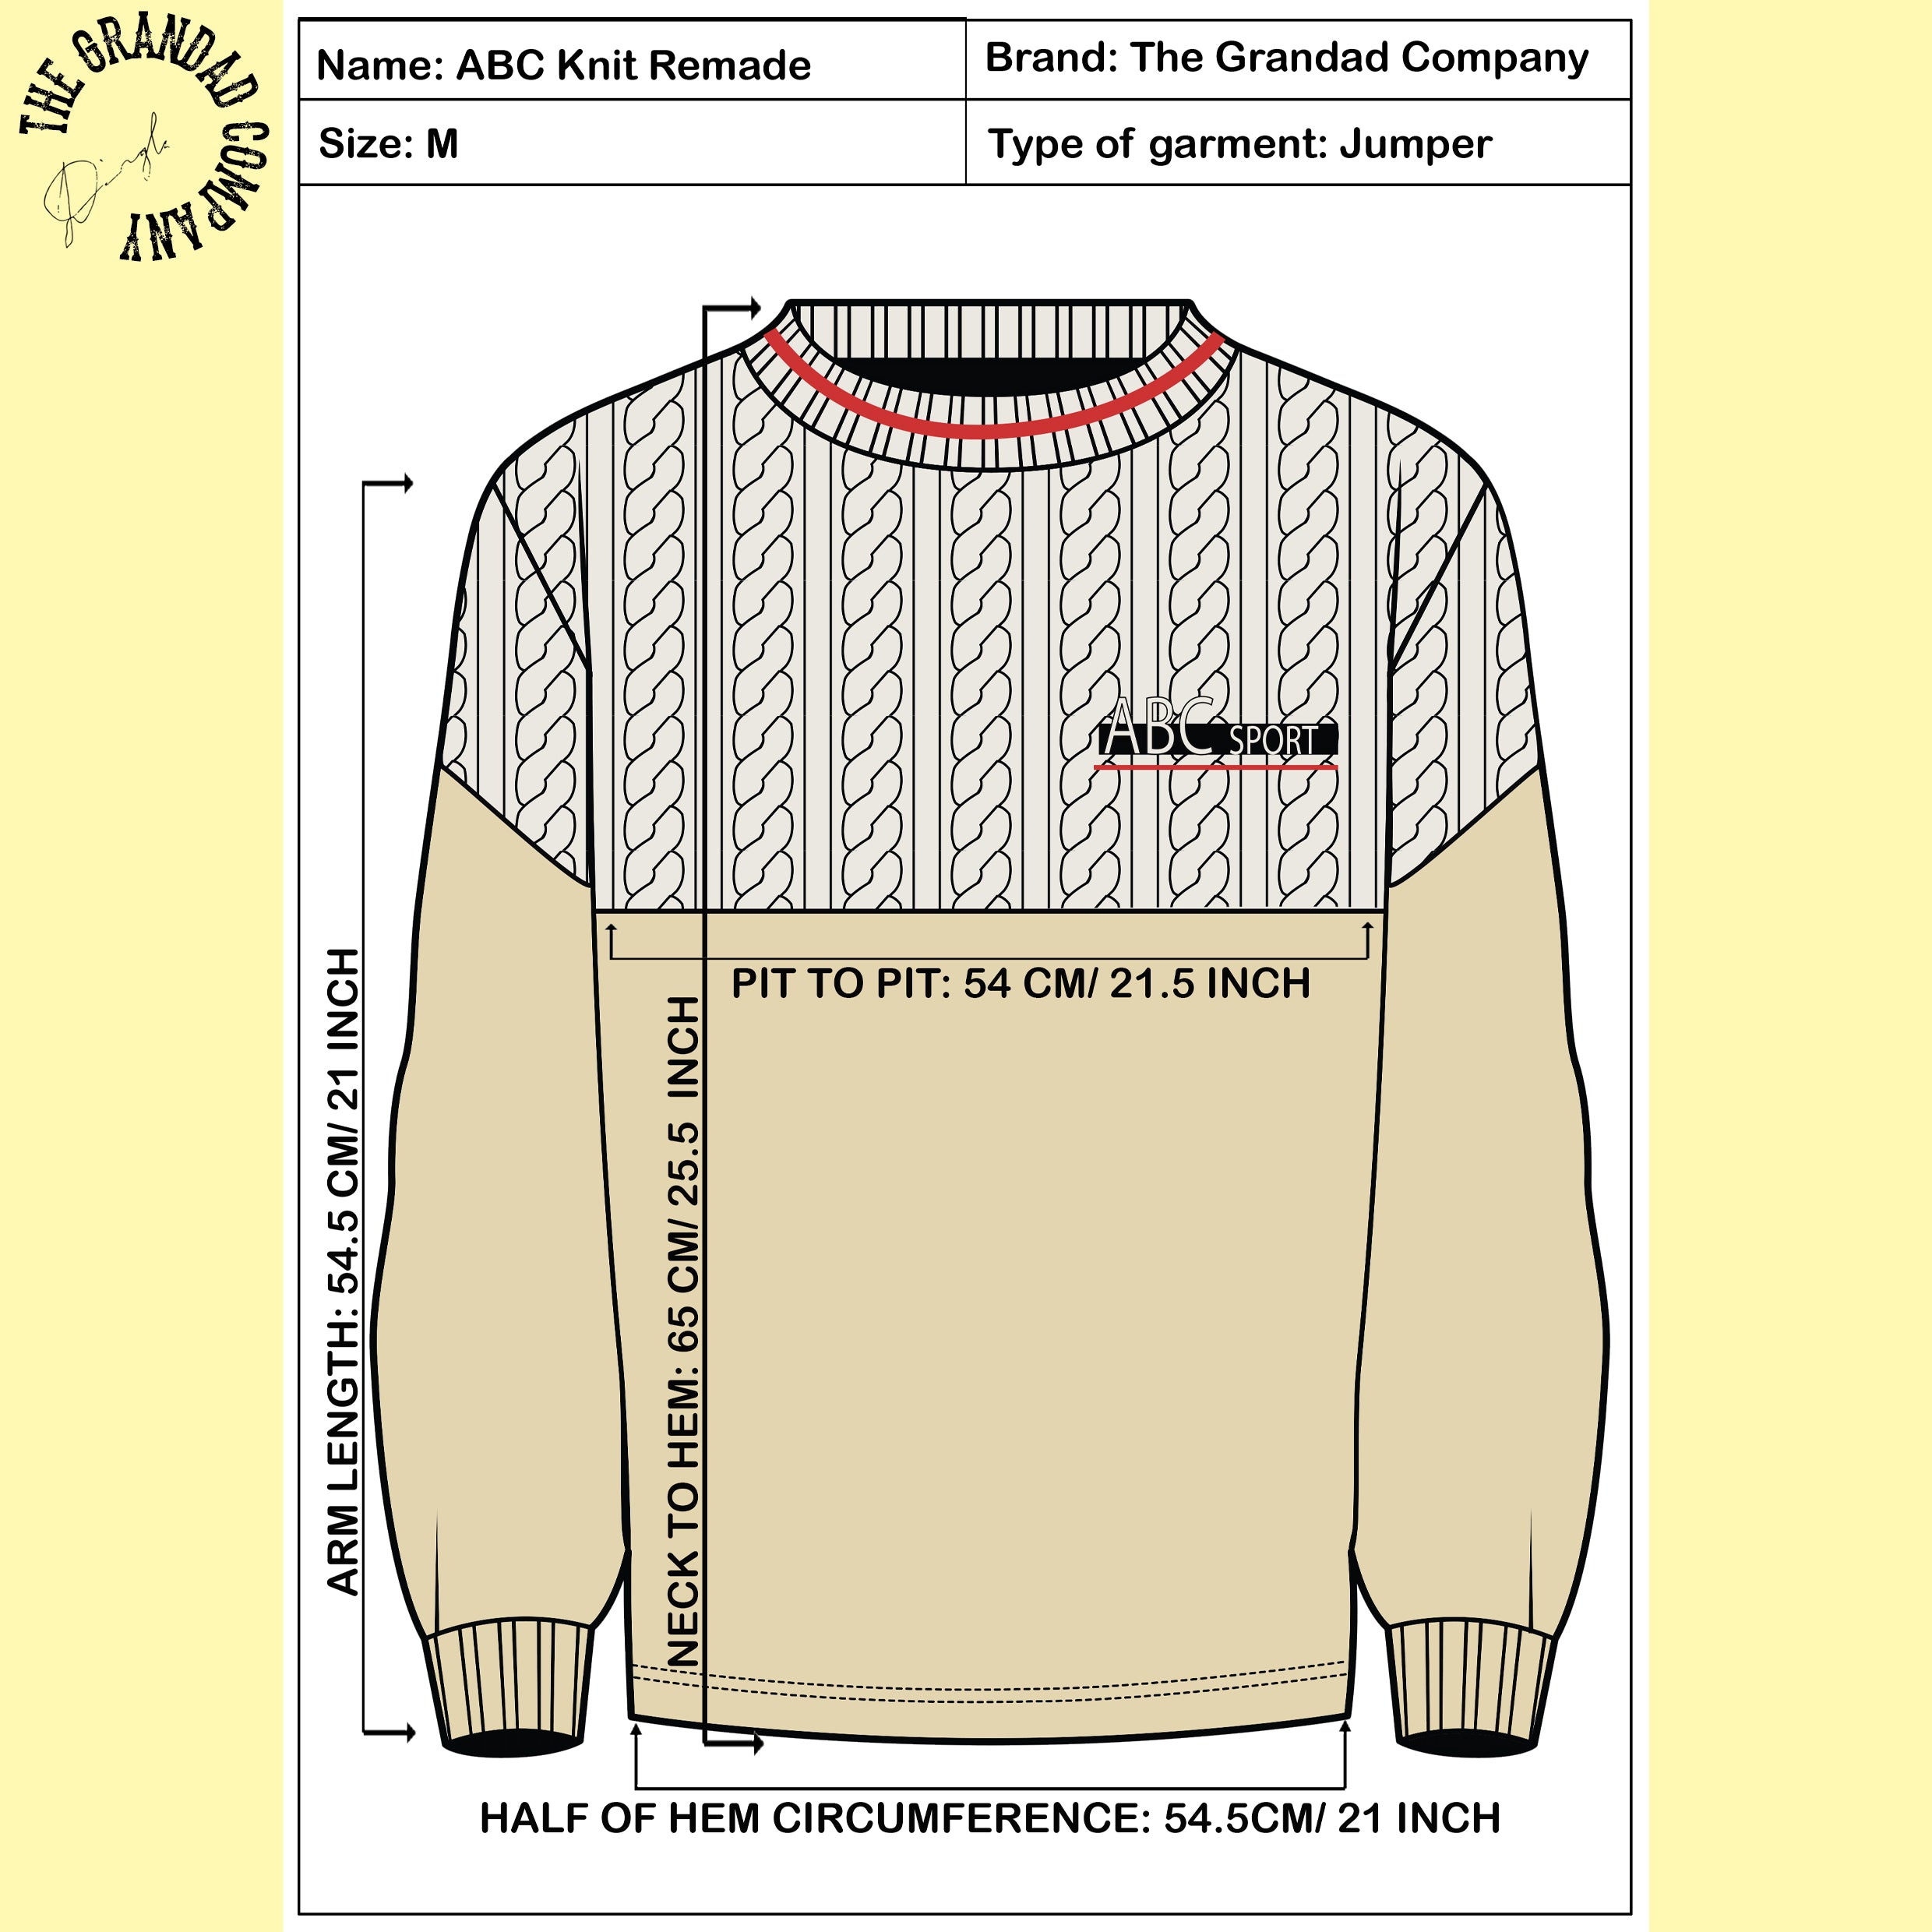 ABC Knit Remade